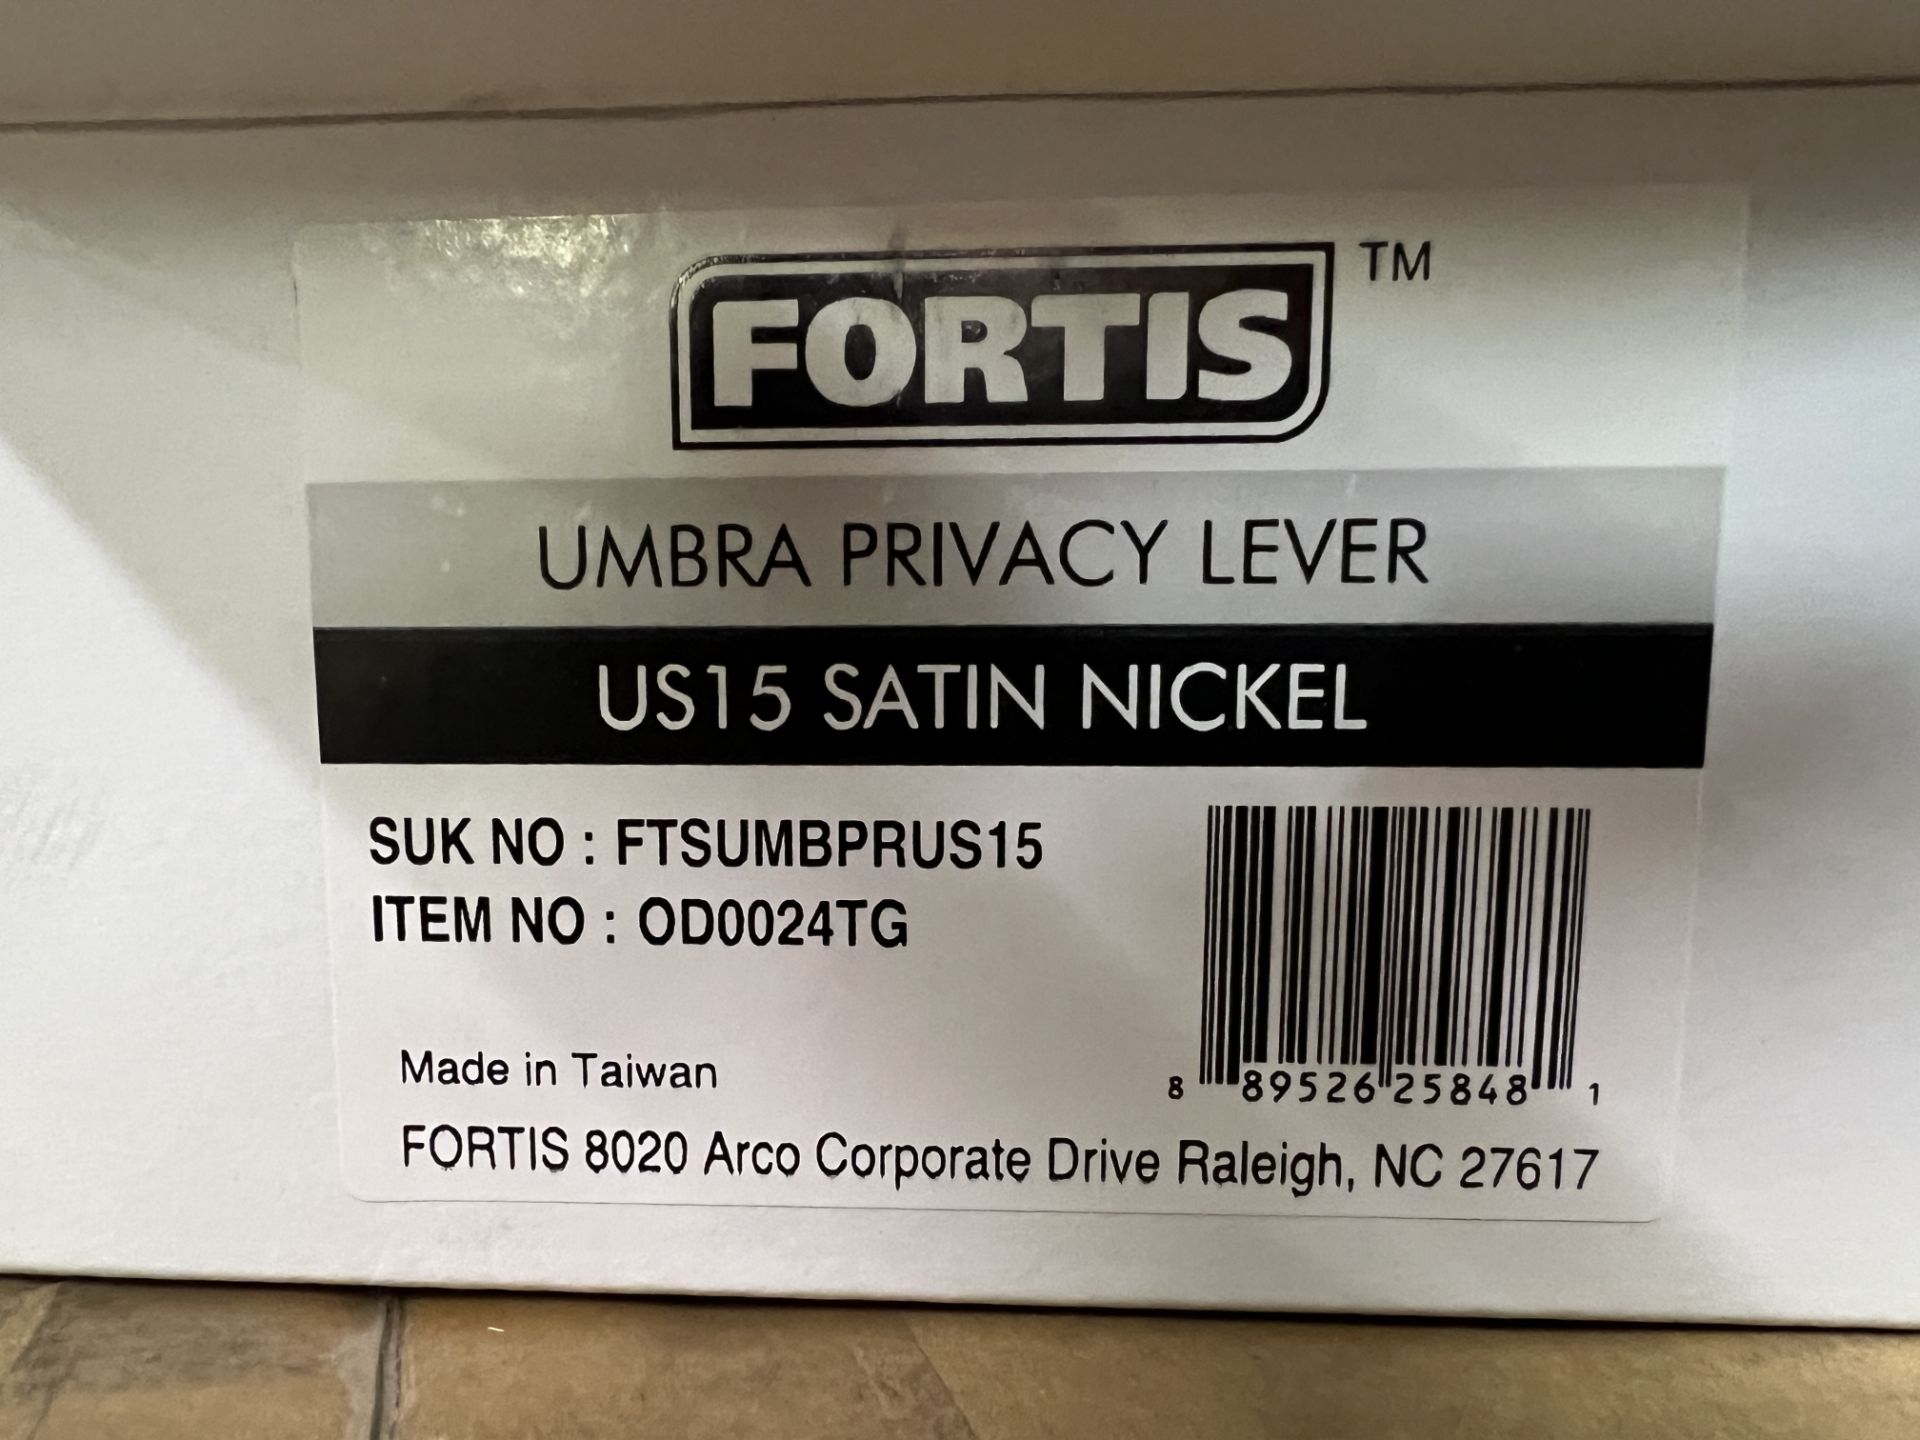 (10) FORTIS UMBRA PRIVACY LEVERS US15 SATIN NICKEL - Image 3 of 3